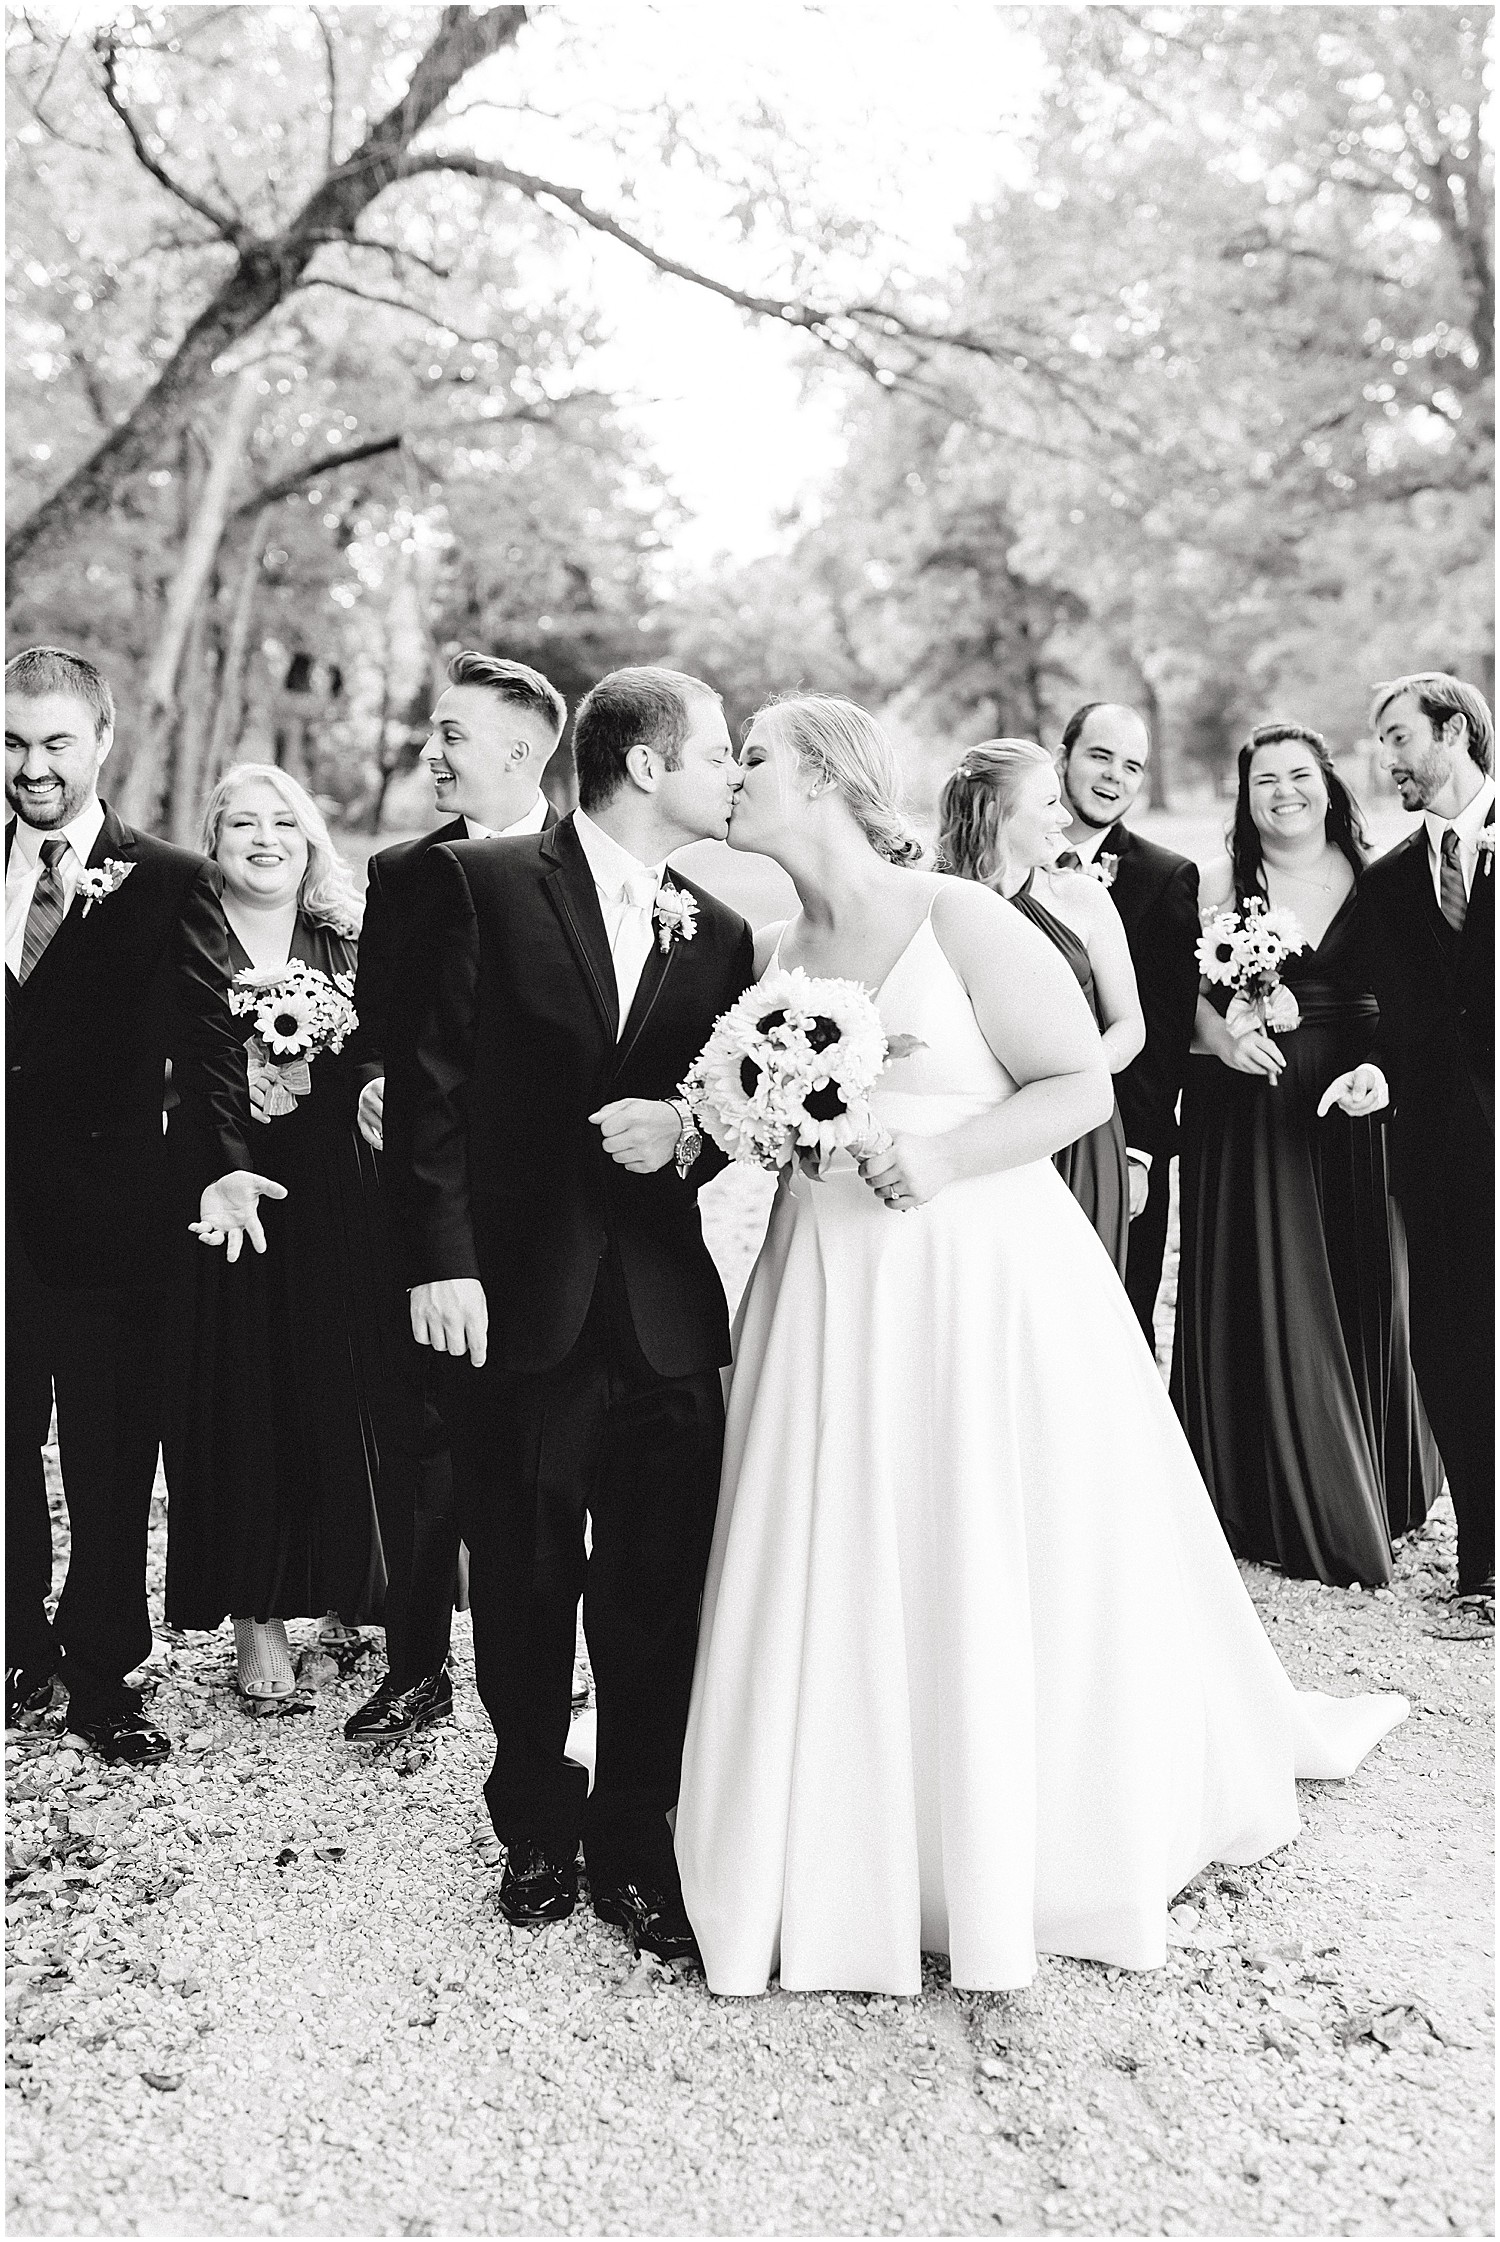 black and white image of bride and groom kissing while wedding party walks behind them